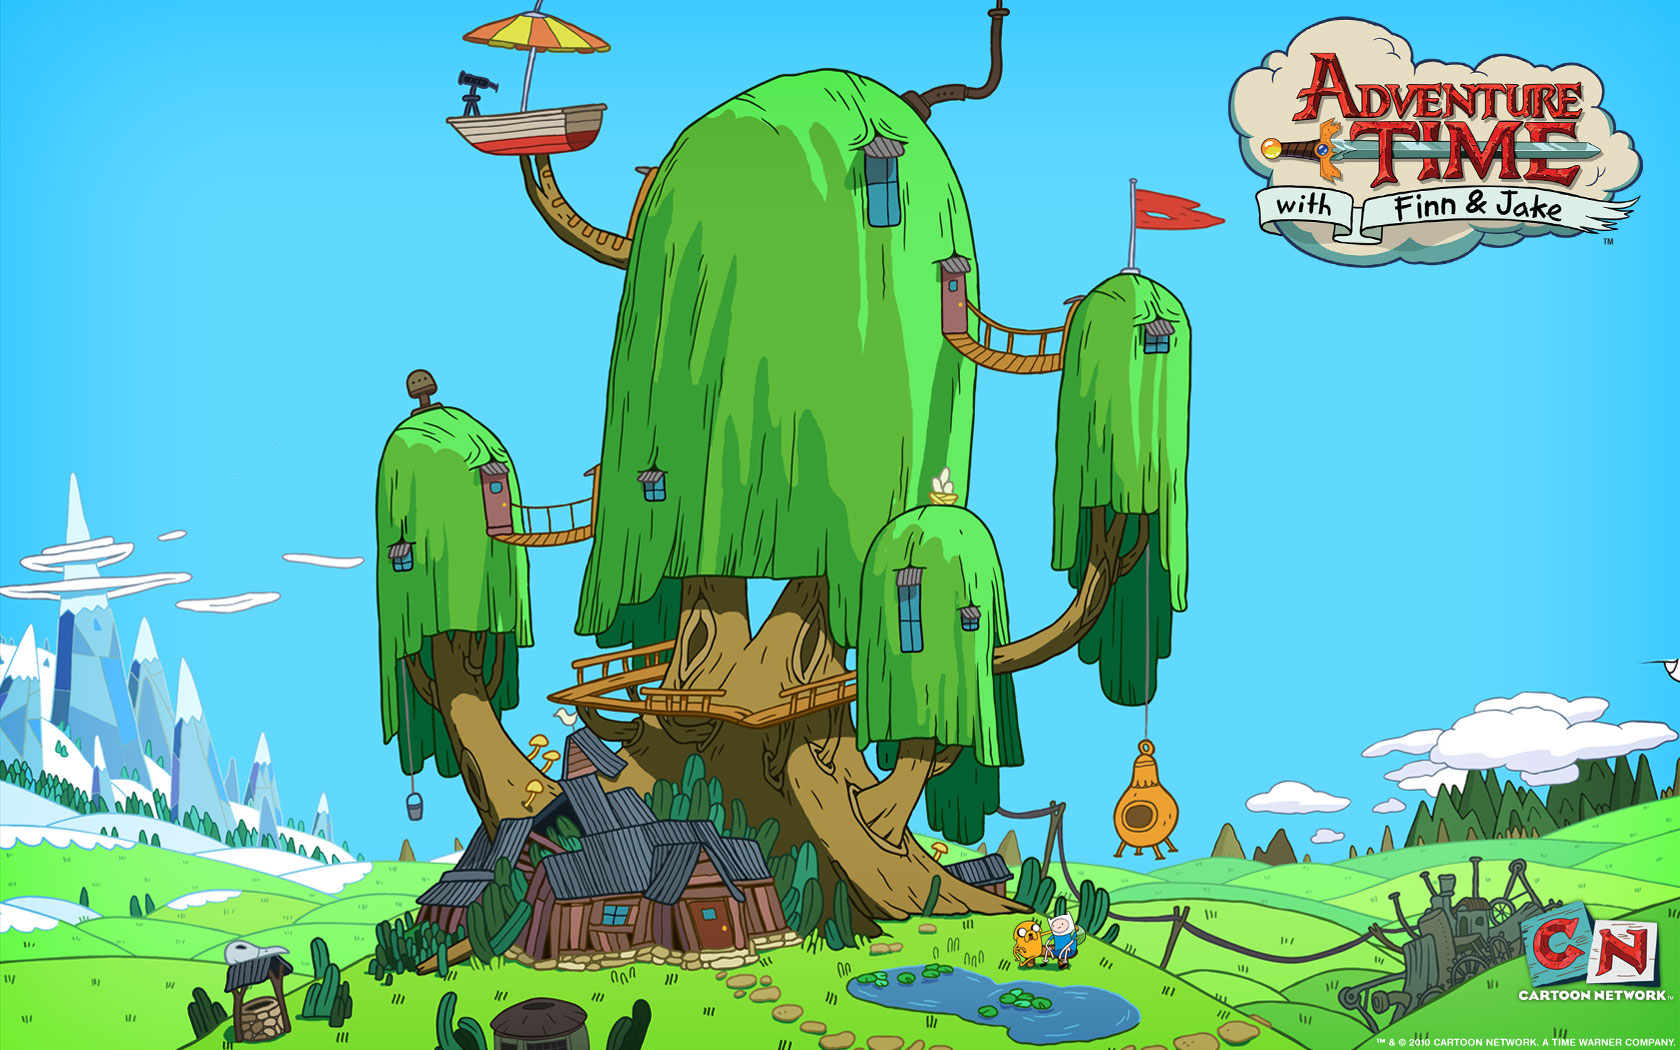 Adventure Time Res: 1680x1050 / Size:344kb. Views: 495433